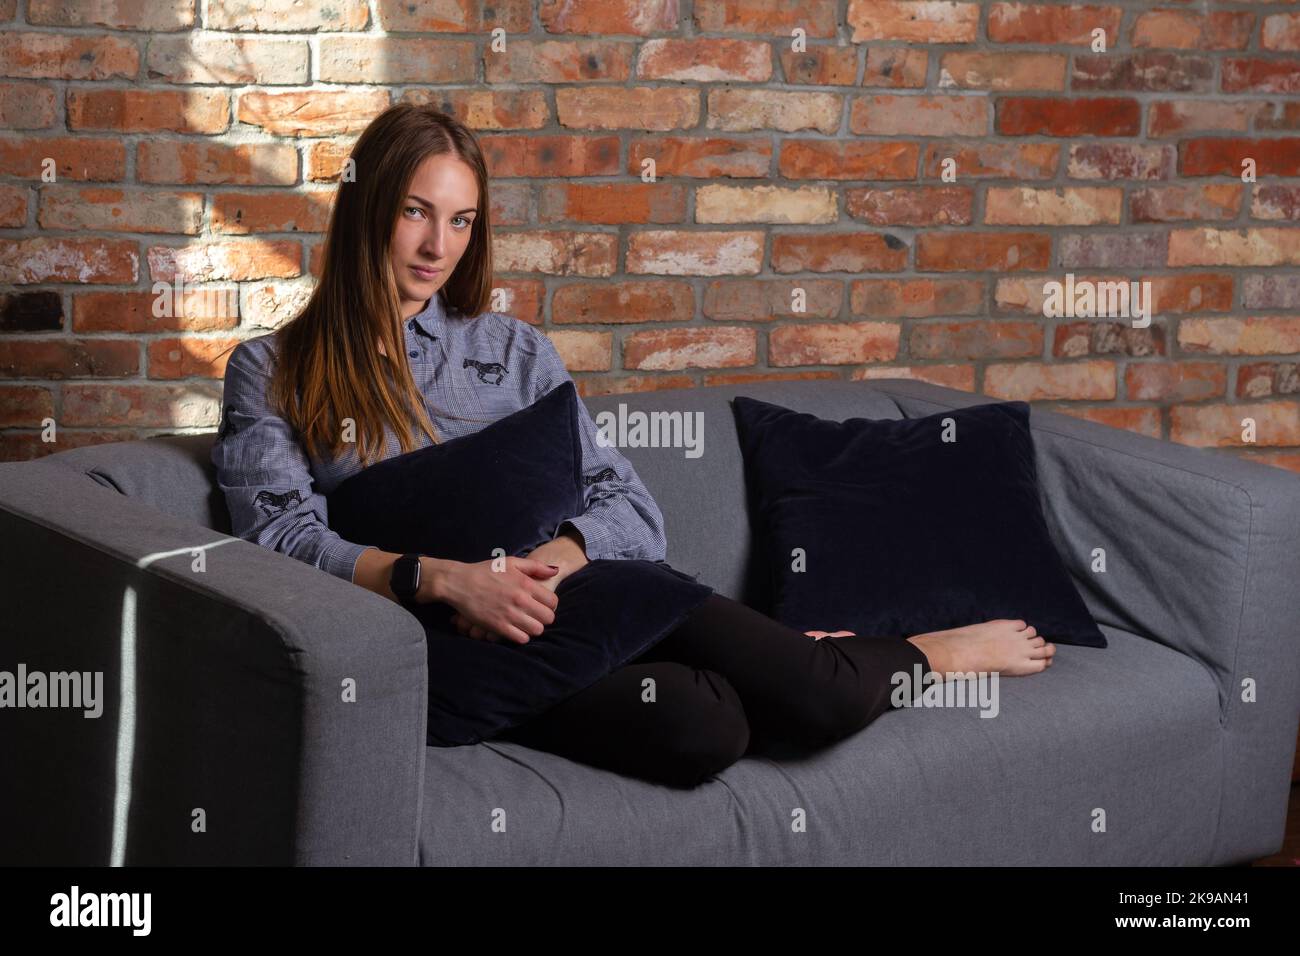 A woman in a blue shirt is on the couch, holding a pillow and looking into the camera Stock Photo